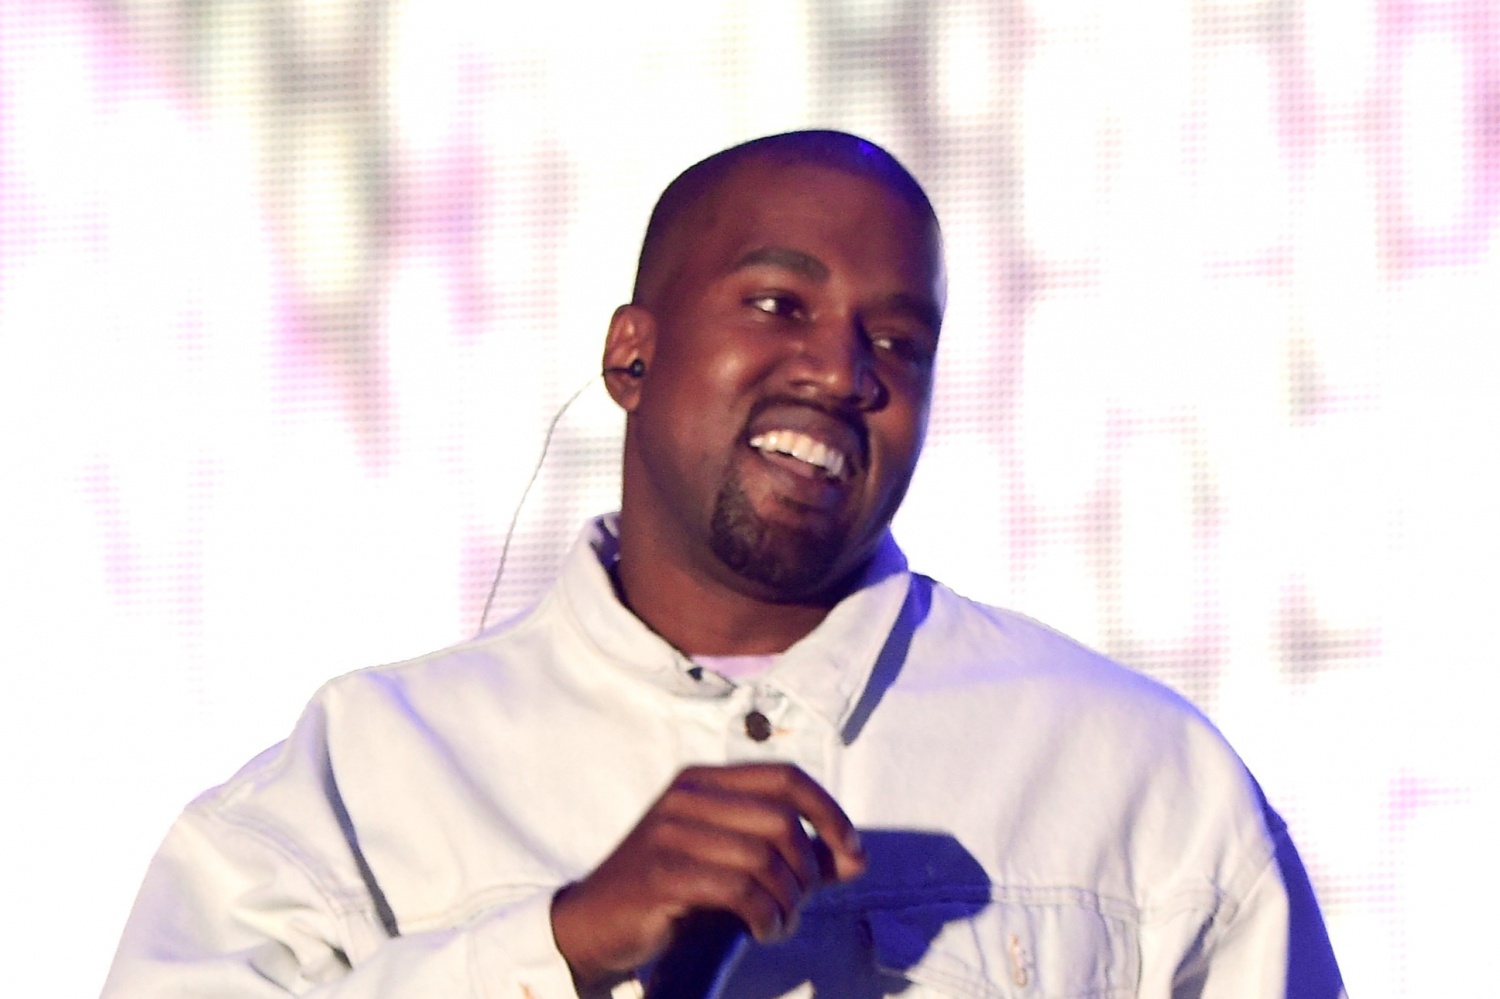 Kanye West sued for allegedly mistreating employees